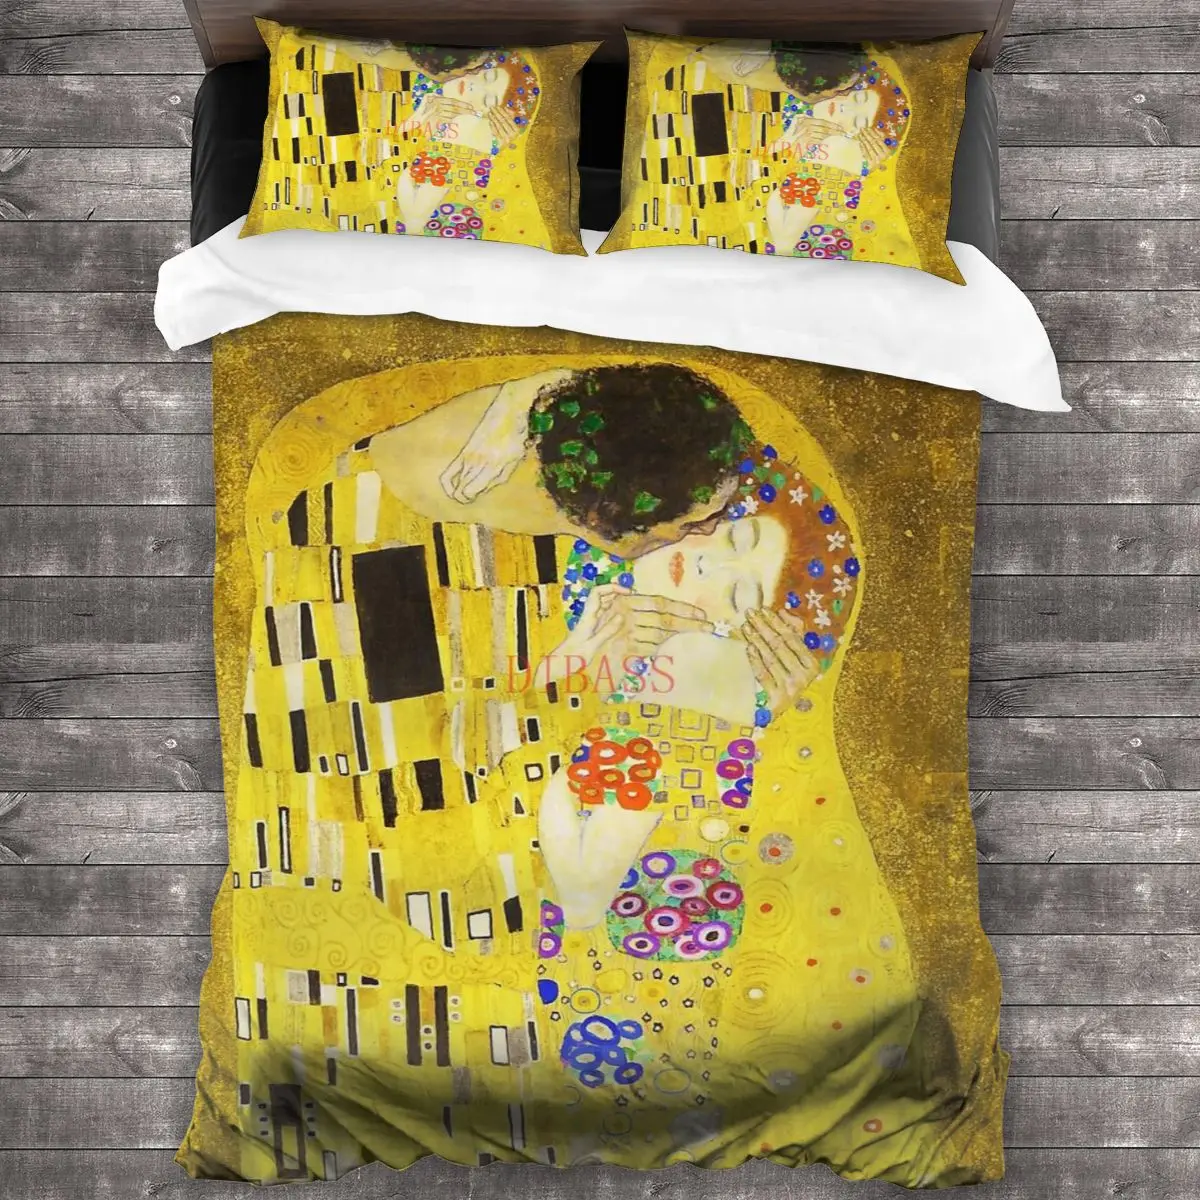 

HD The Kiss, By Gustav Klimt 1907-1908 Soft Microfiber Comforter Set with 2 Pillowcase, Quilt Cover With Zipper